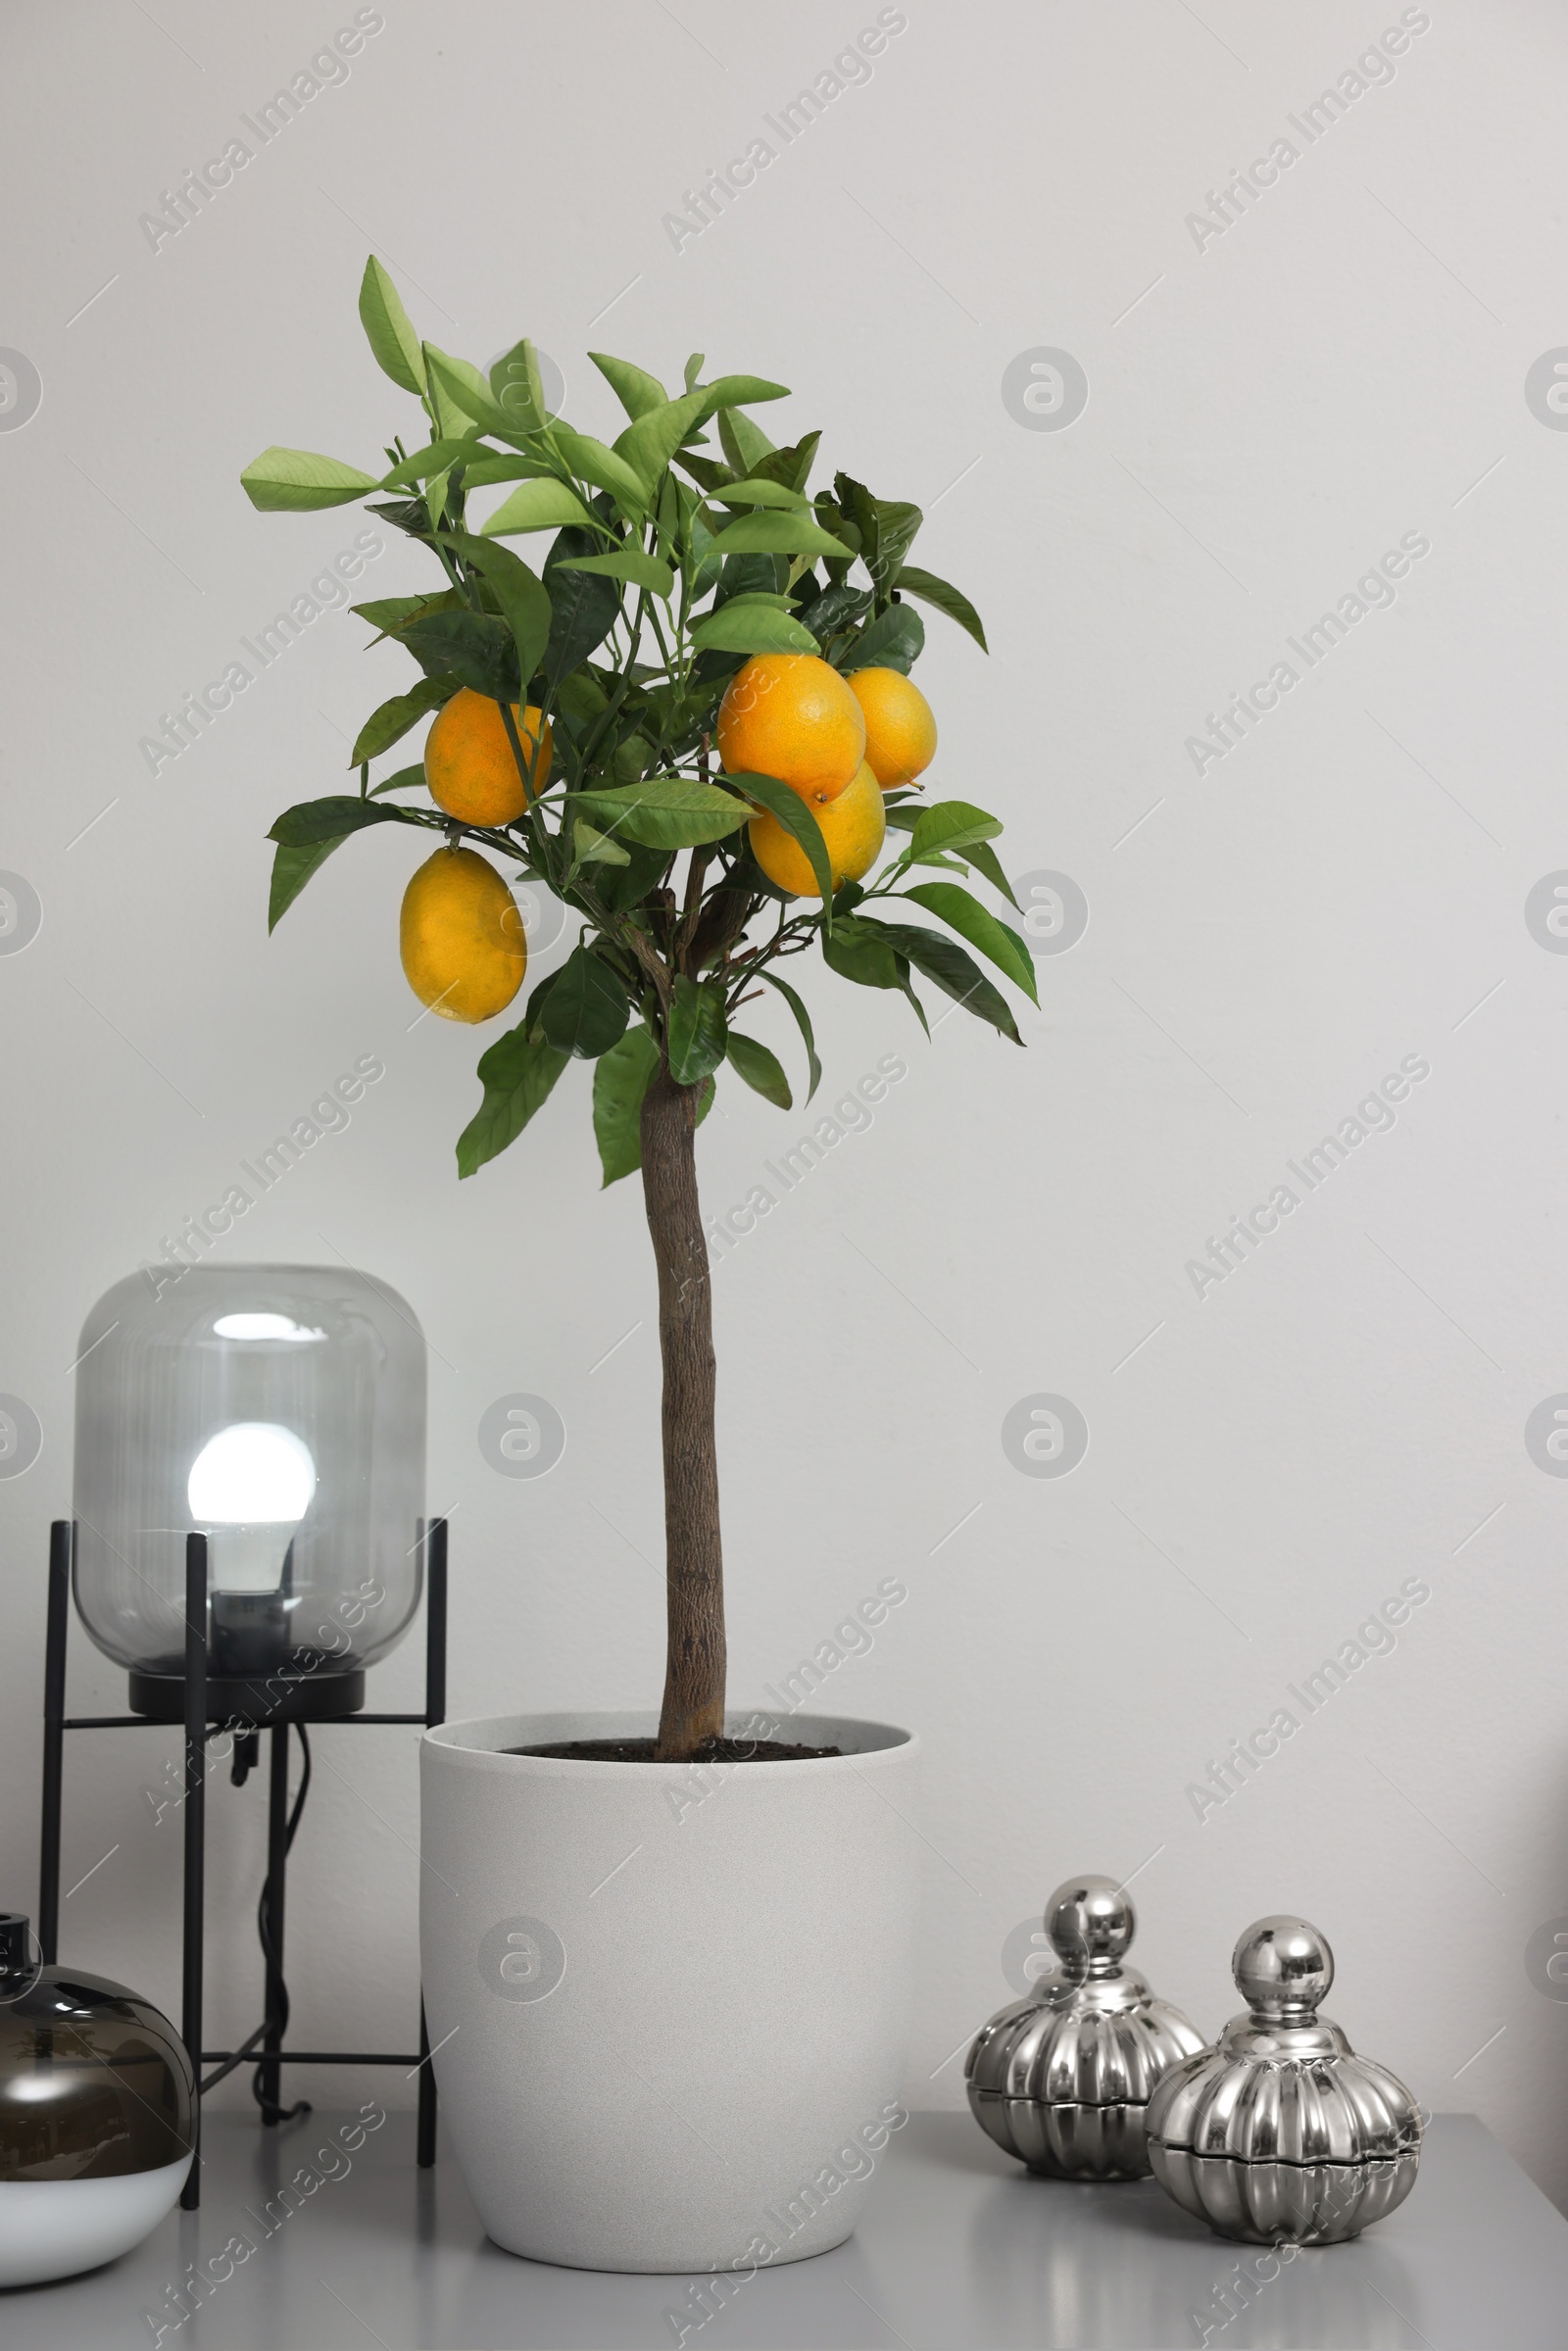 Photo of Potted lemon tree with ripe fruits on chest of drawers in room